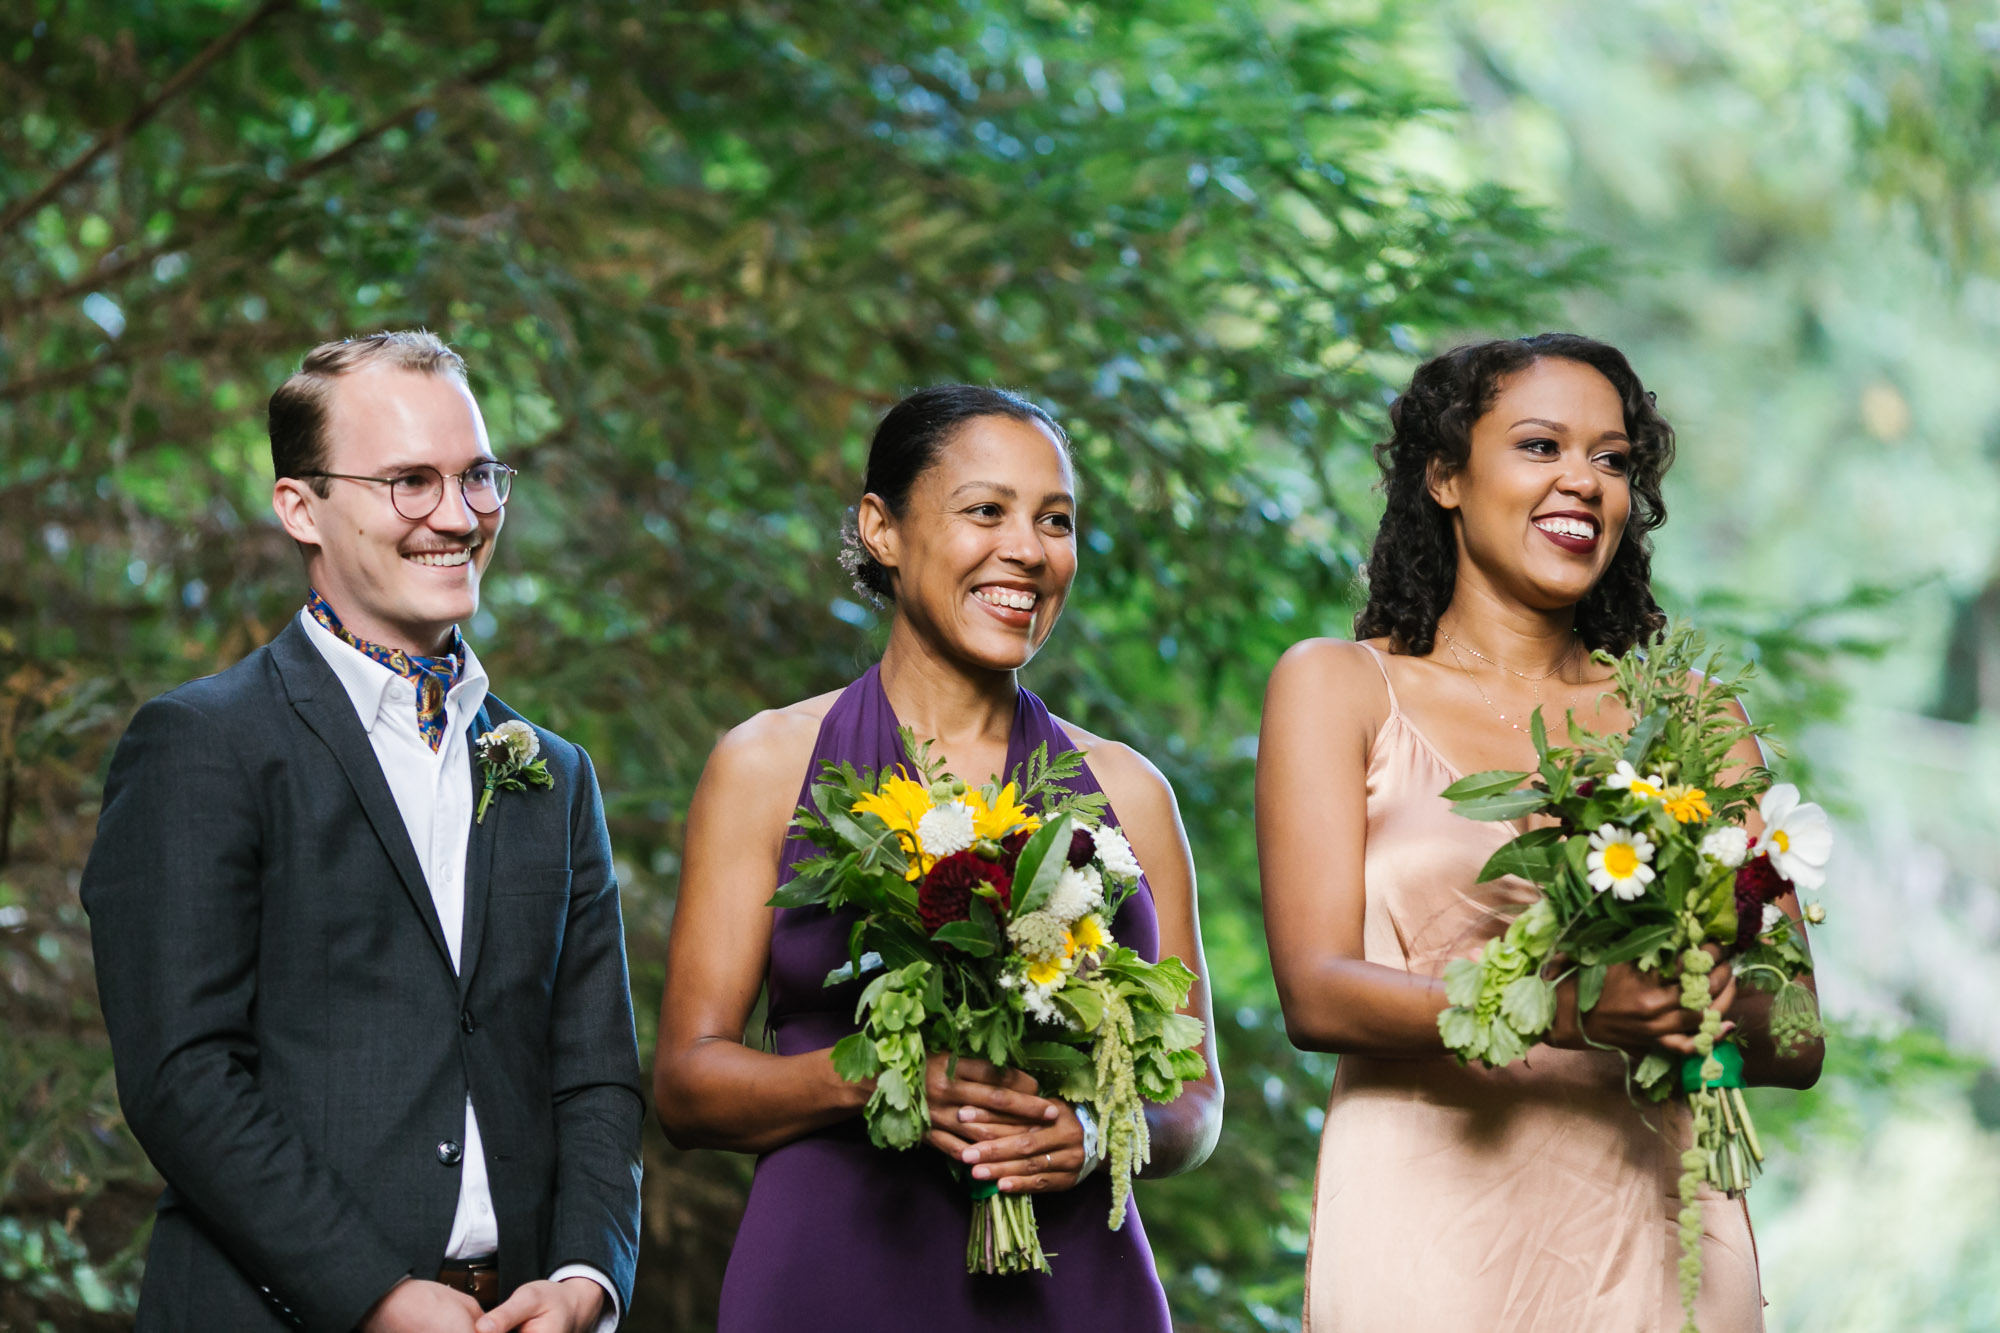 Bridesmaids smile during wedding ceremony holding handmade bouquets